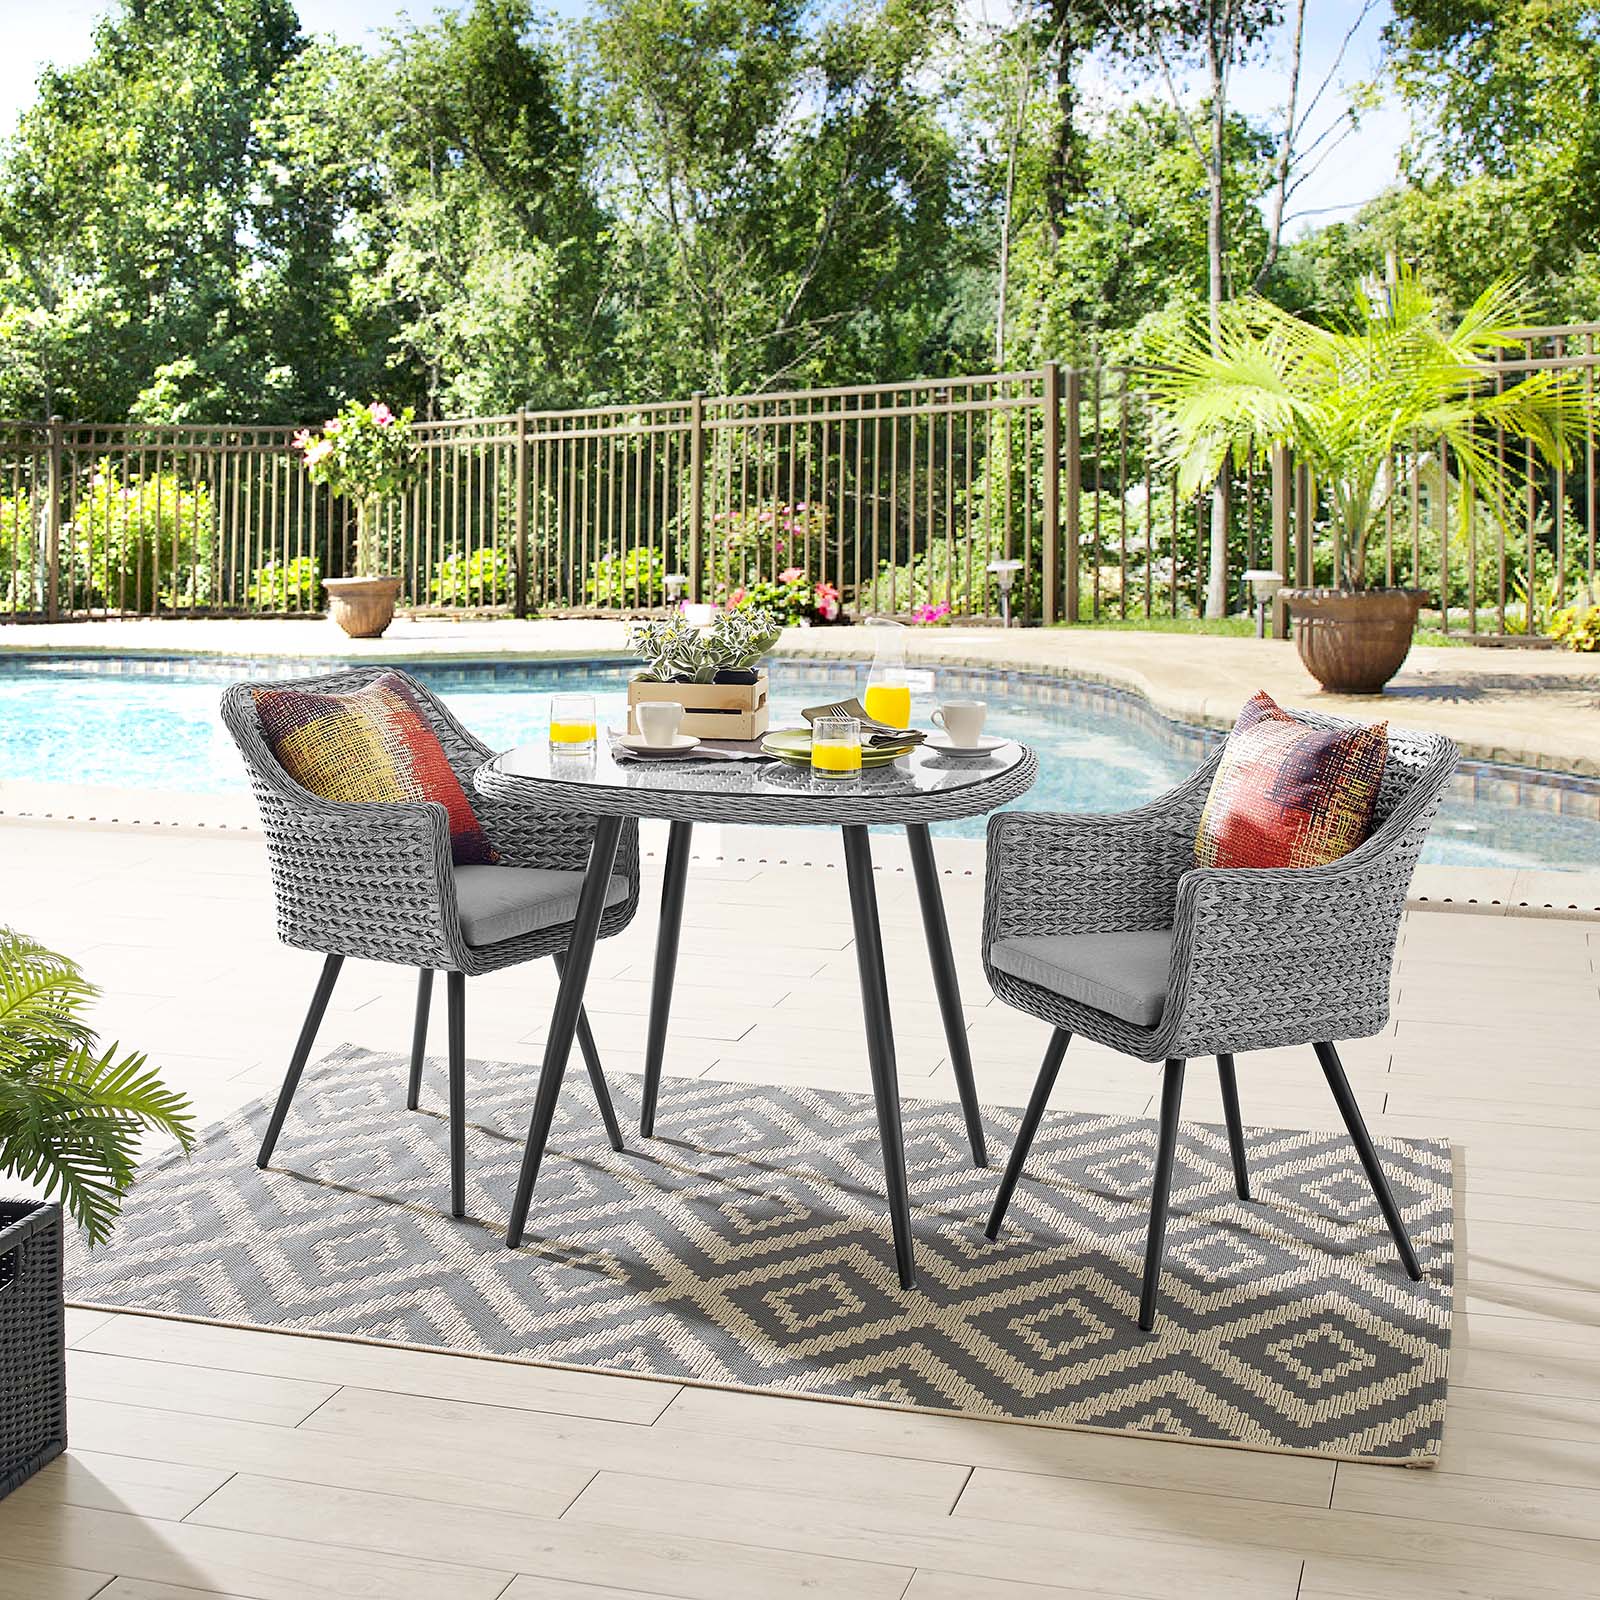 Contemporary Modern Urban Designer Outdoor Patio Balcony Garden Furniture Side Dining Chair and Table Set, Fabric Rattan Wicker Aluminum, Grey Gray - image 2 of 8